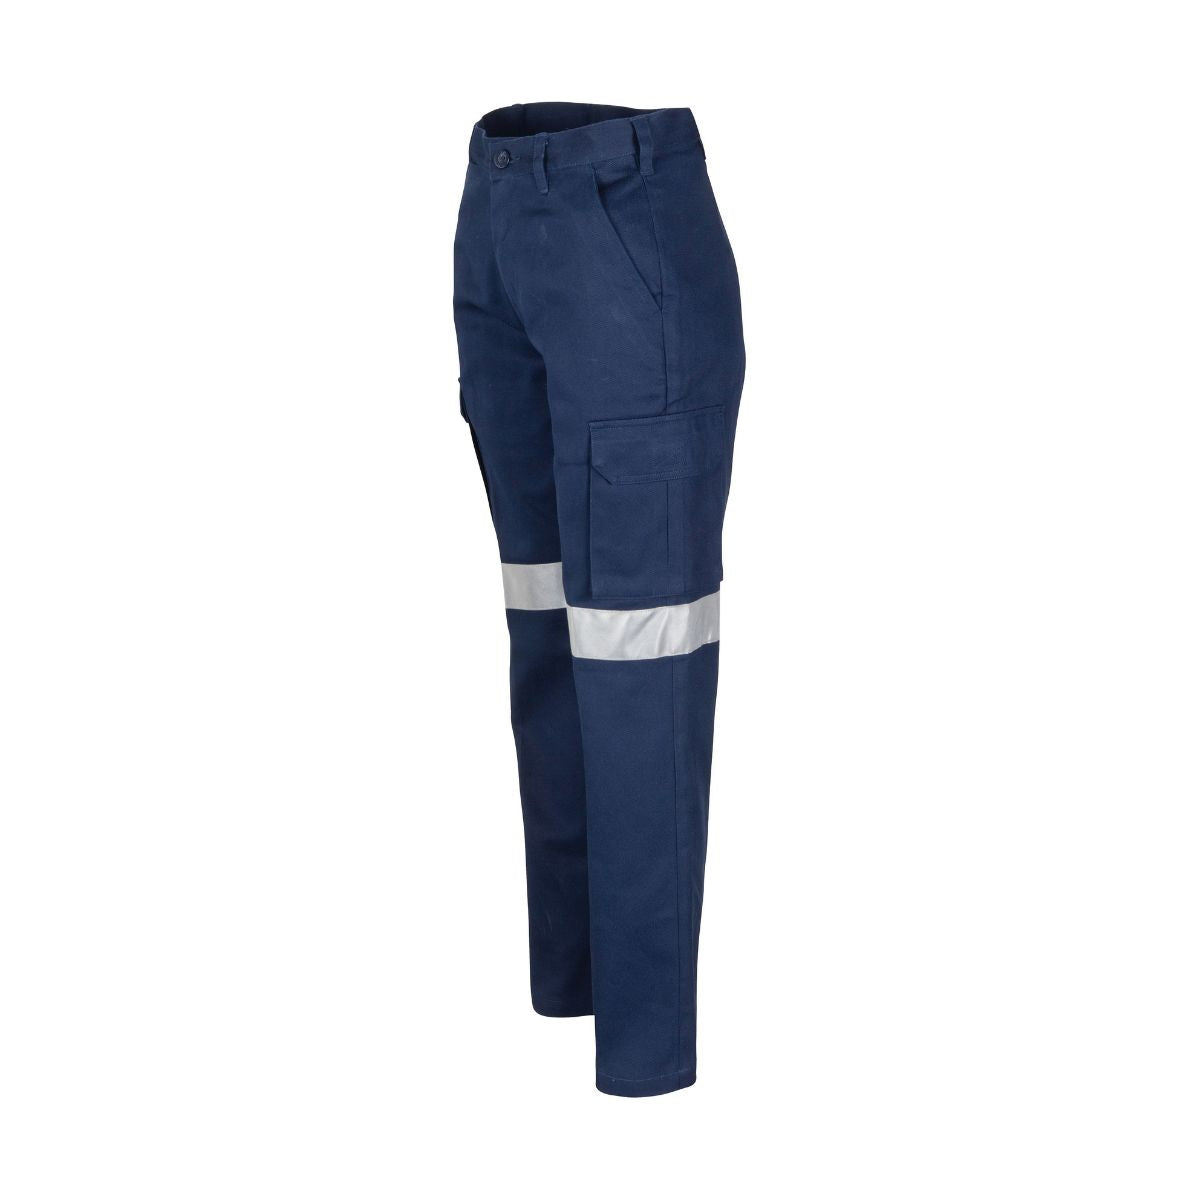 DNC Women's Cotton Drill Cargo Pants with 3M Reflective Tape 3323